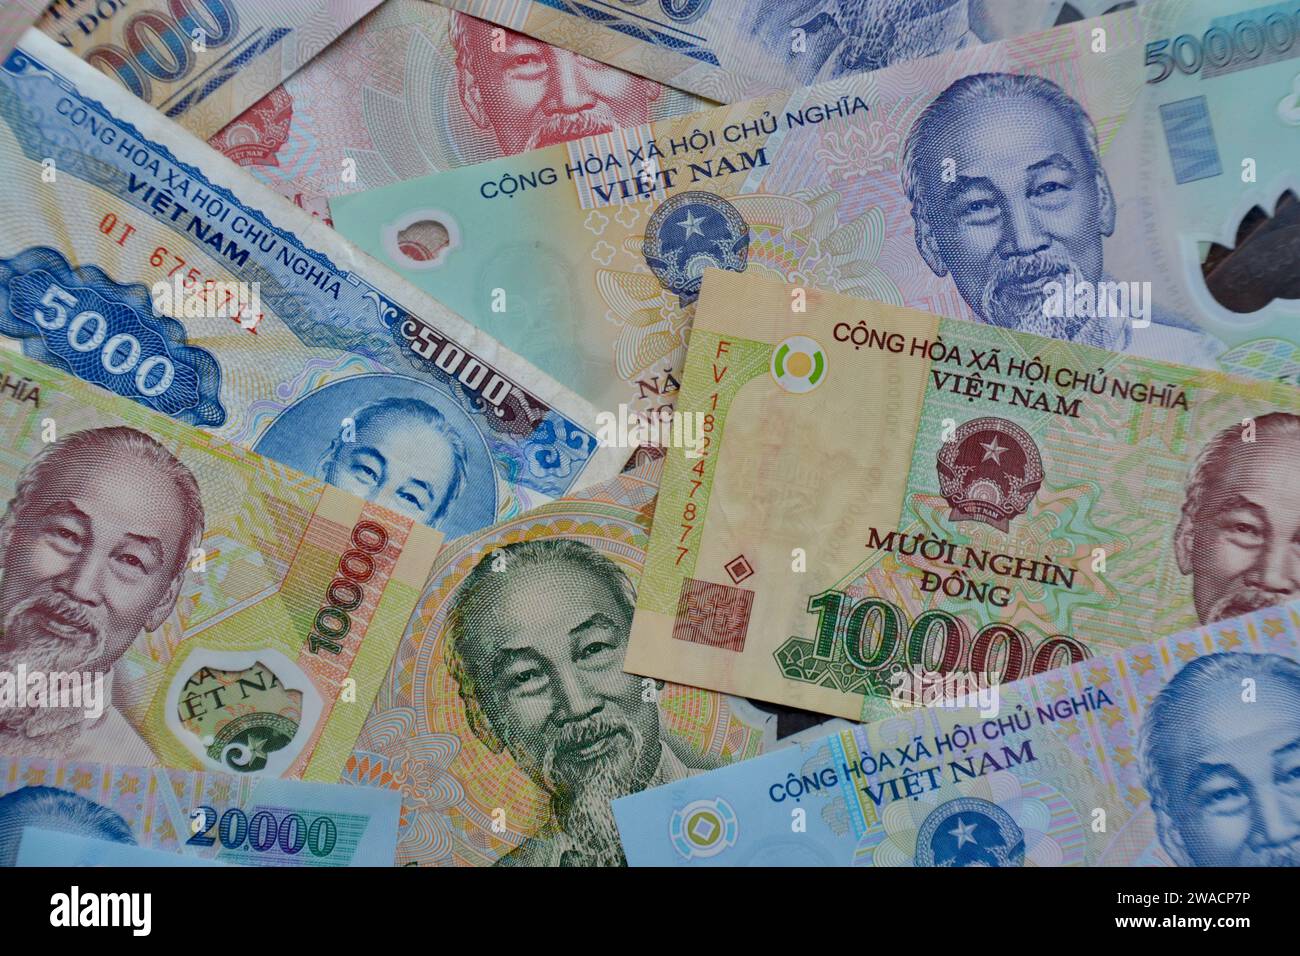 Many bank notes laid out flat in a collage a high denomination Vietnamese Dong as a concept for wealth, finance and business Stock Photo